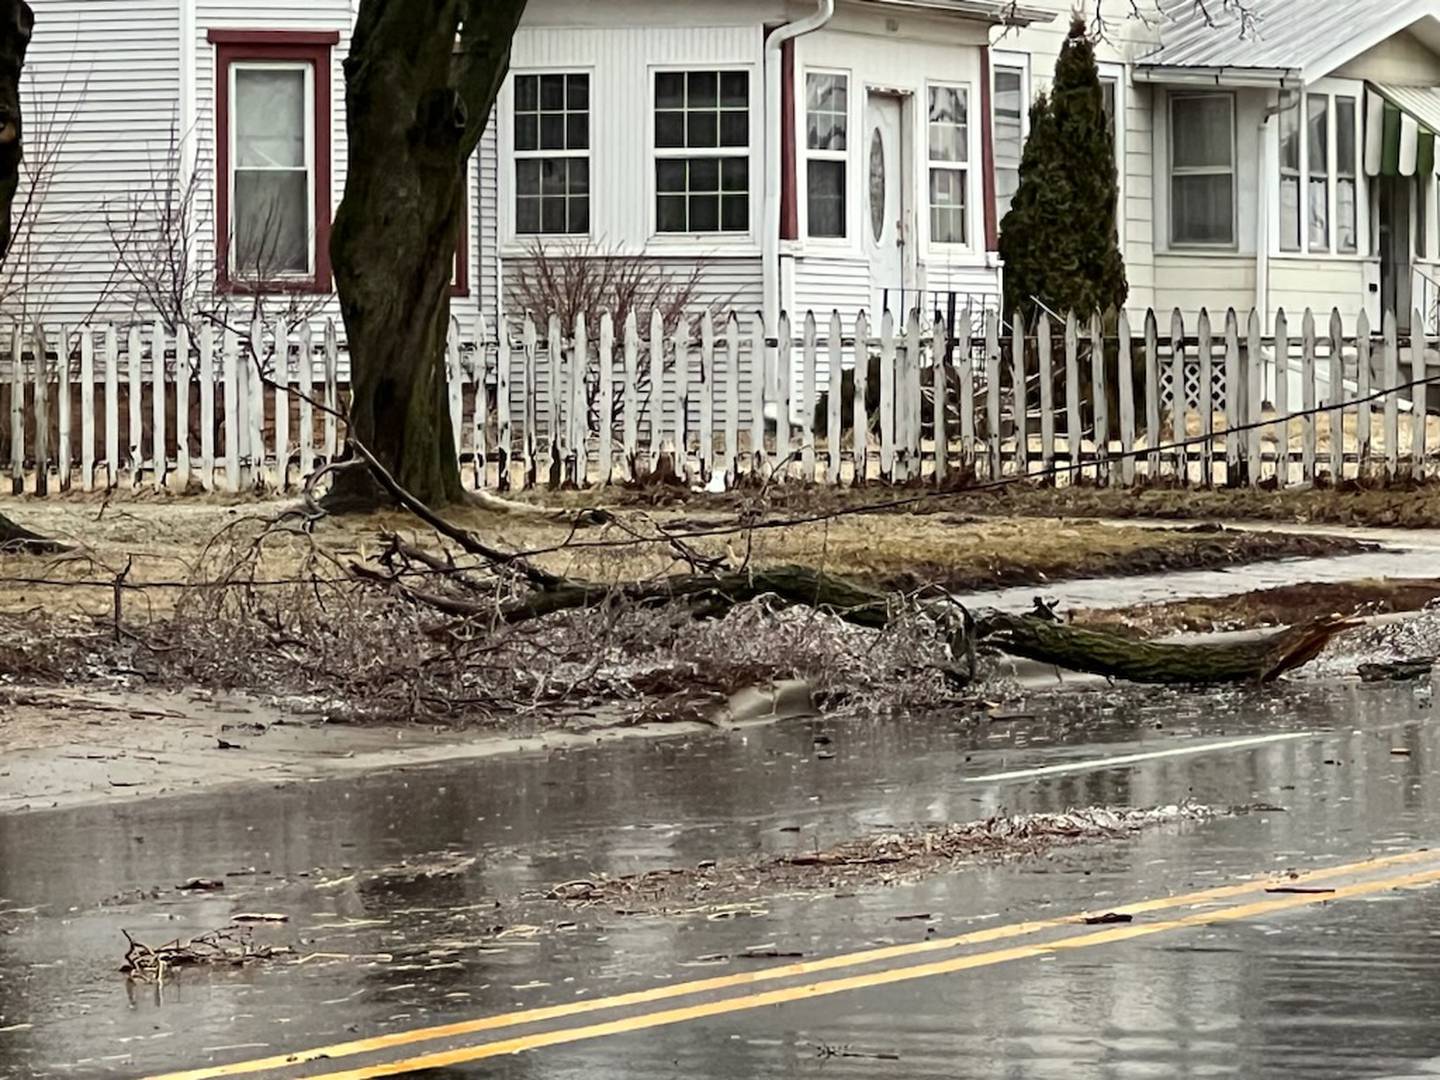 East Lincoln Highway between ninth and 11th streets was briefly closed Wednesday afternoon, Feb. 22, 2023 for downed live wires and a large tree branch blocking the roadway, according to the city of DeKalb. Wednesday brought with it consistent freezing rain.